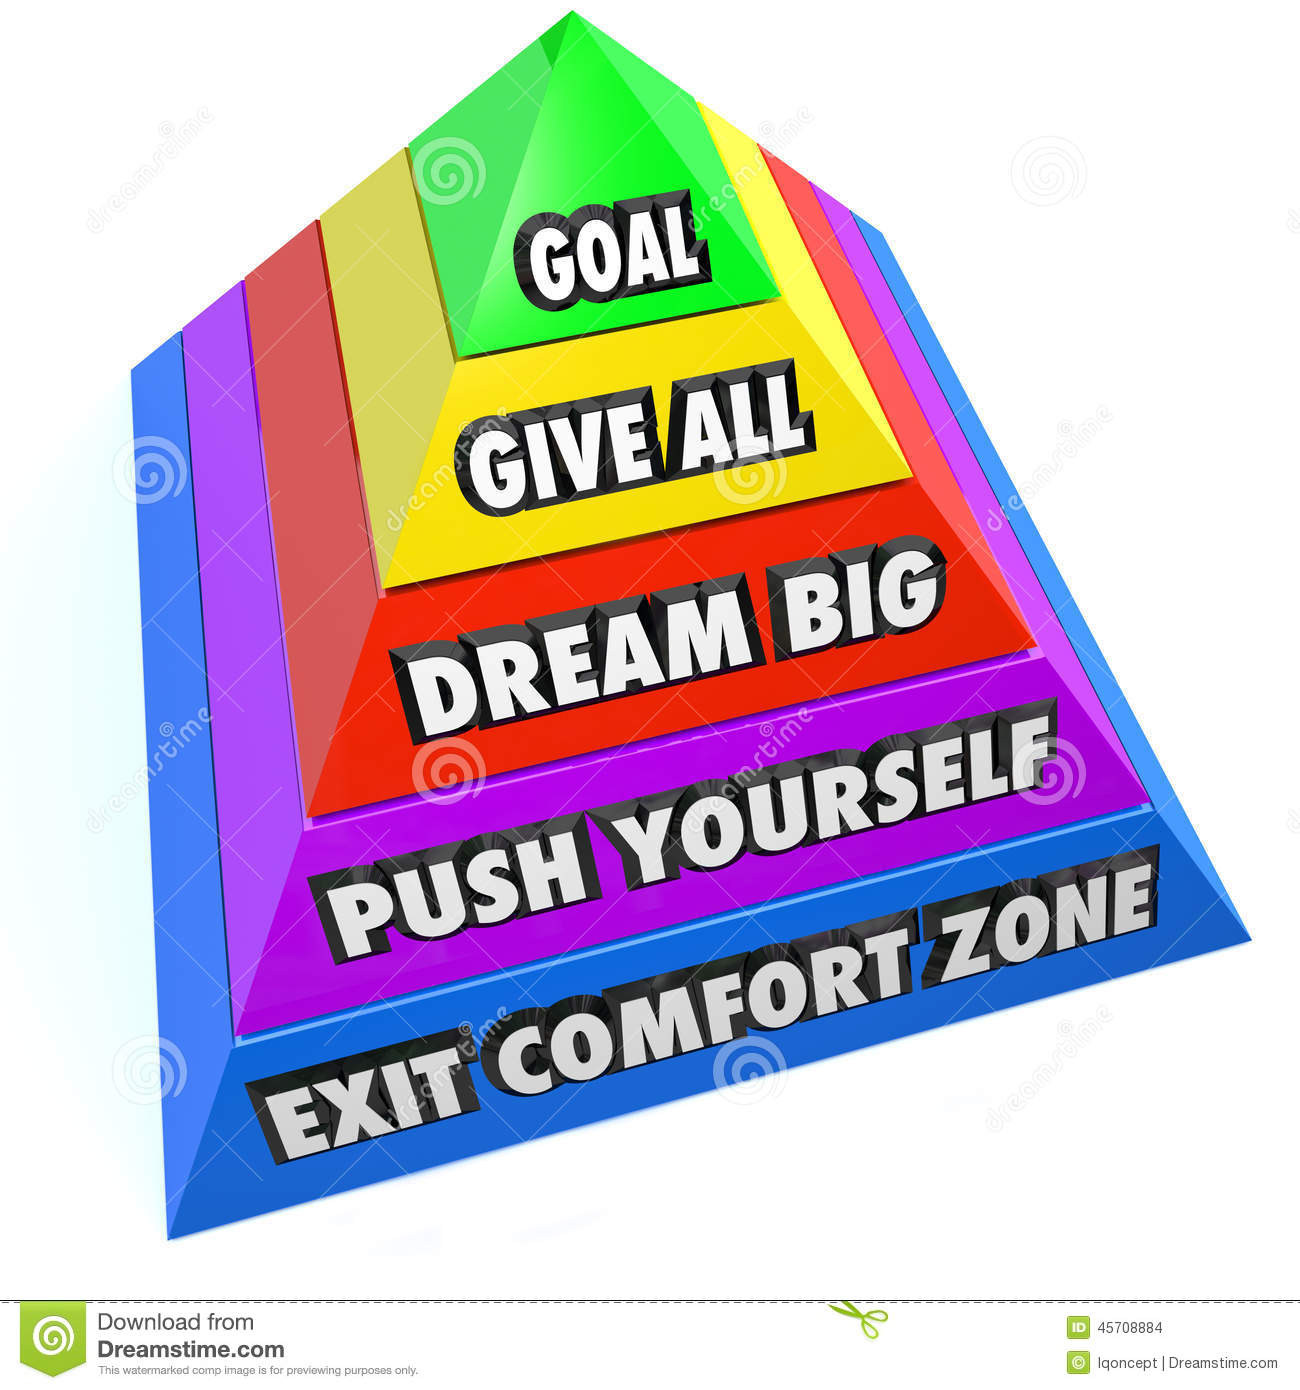 Exit Comfort Zone Push Yourself Dream Big Give All And Reach Goal